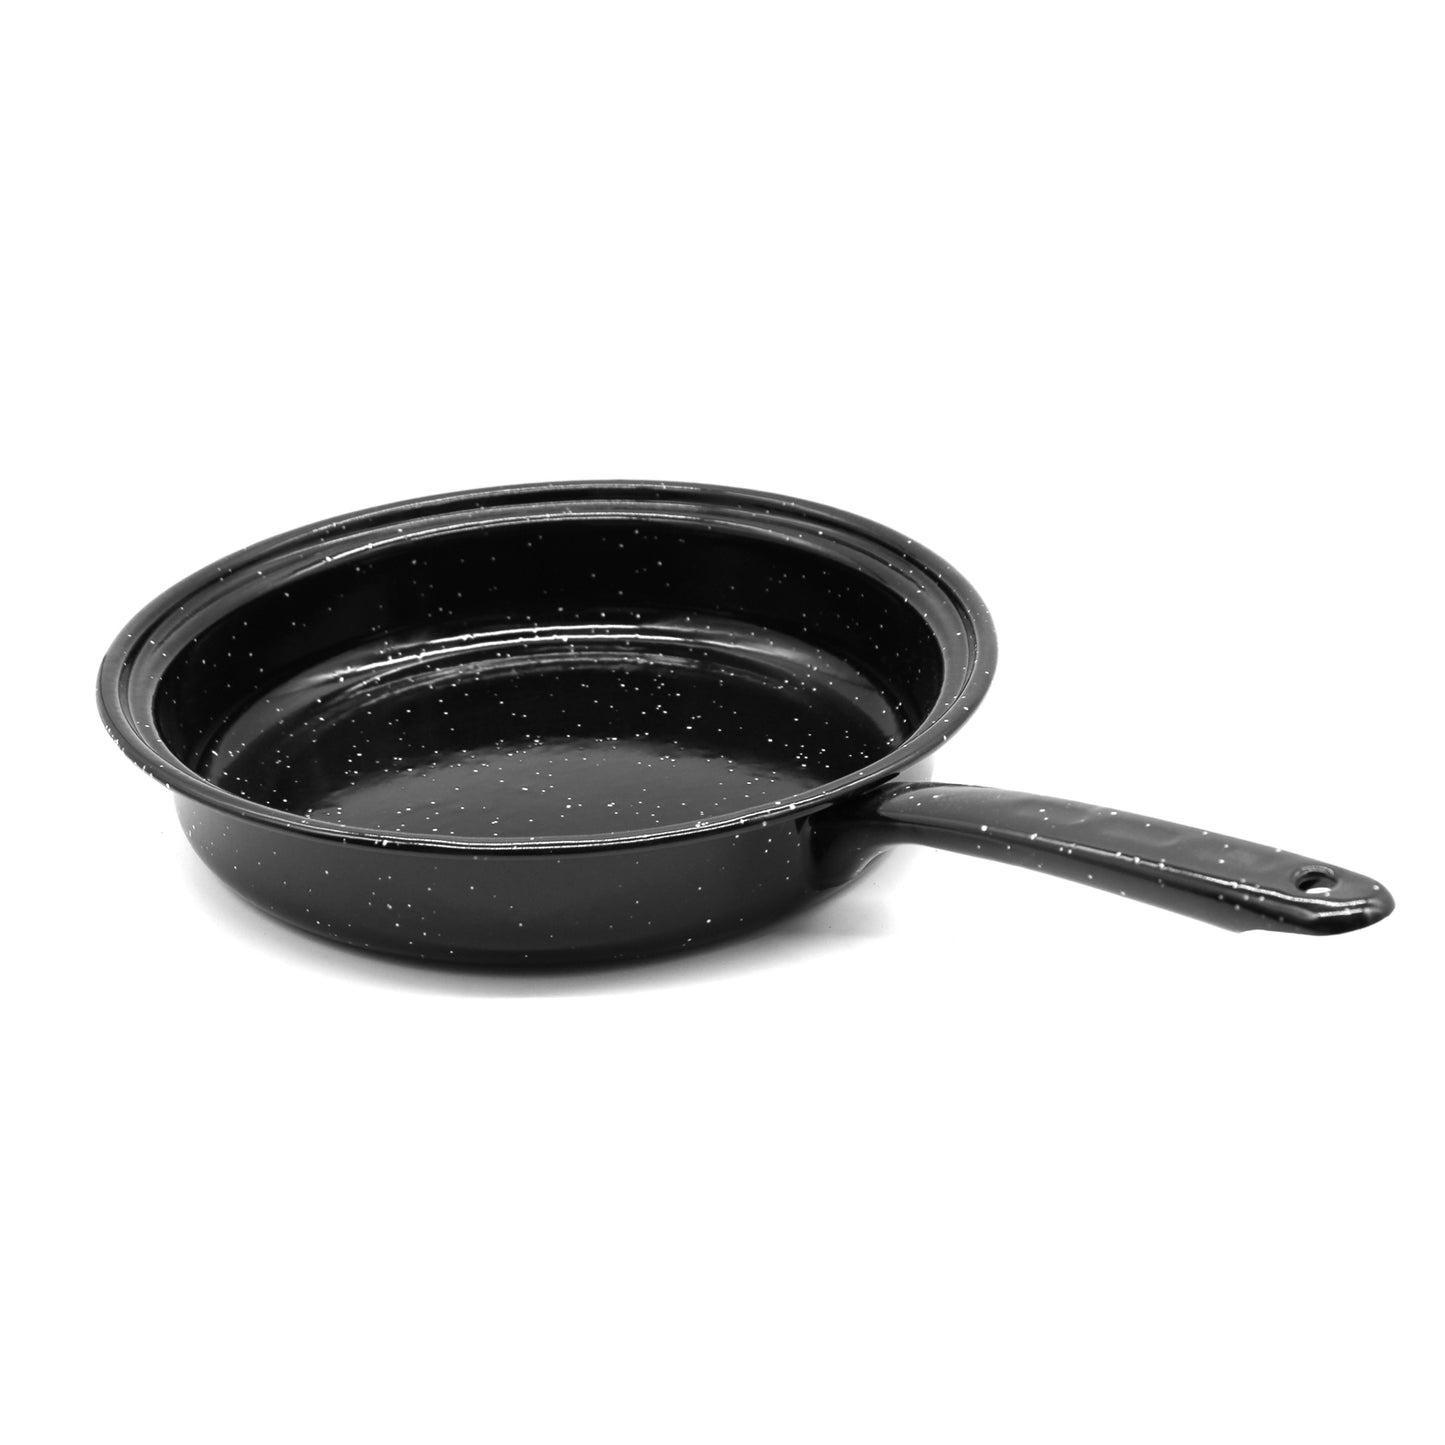 Frying pan for outdoor cooking and camping